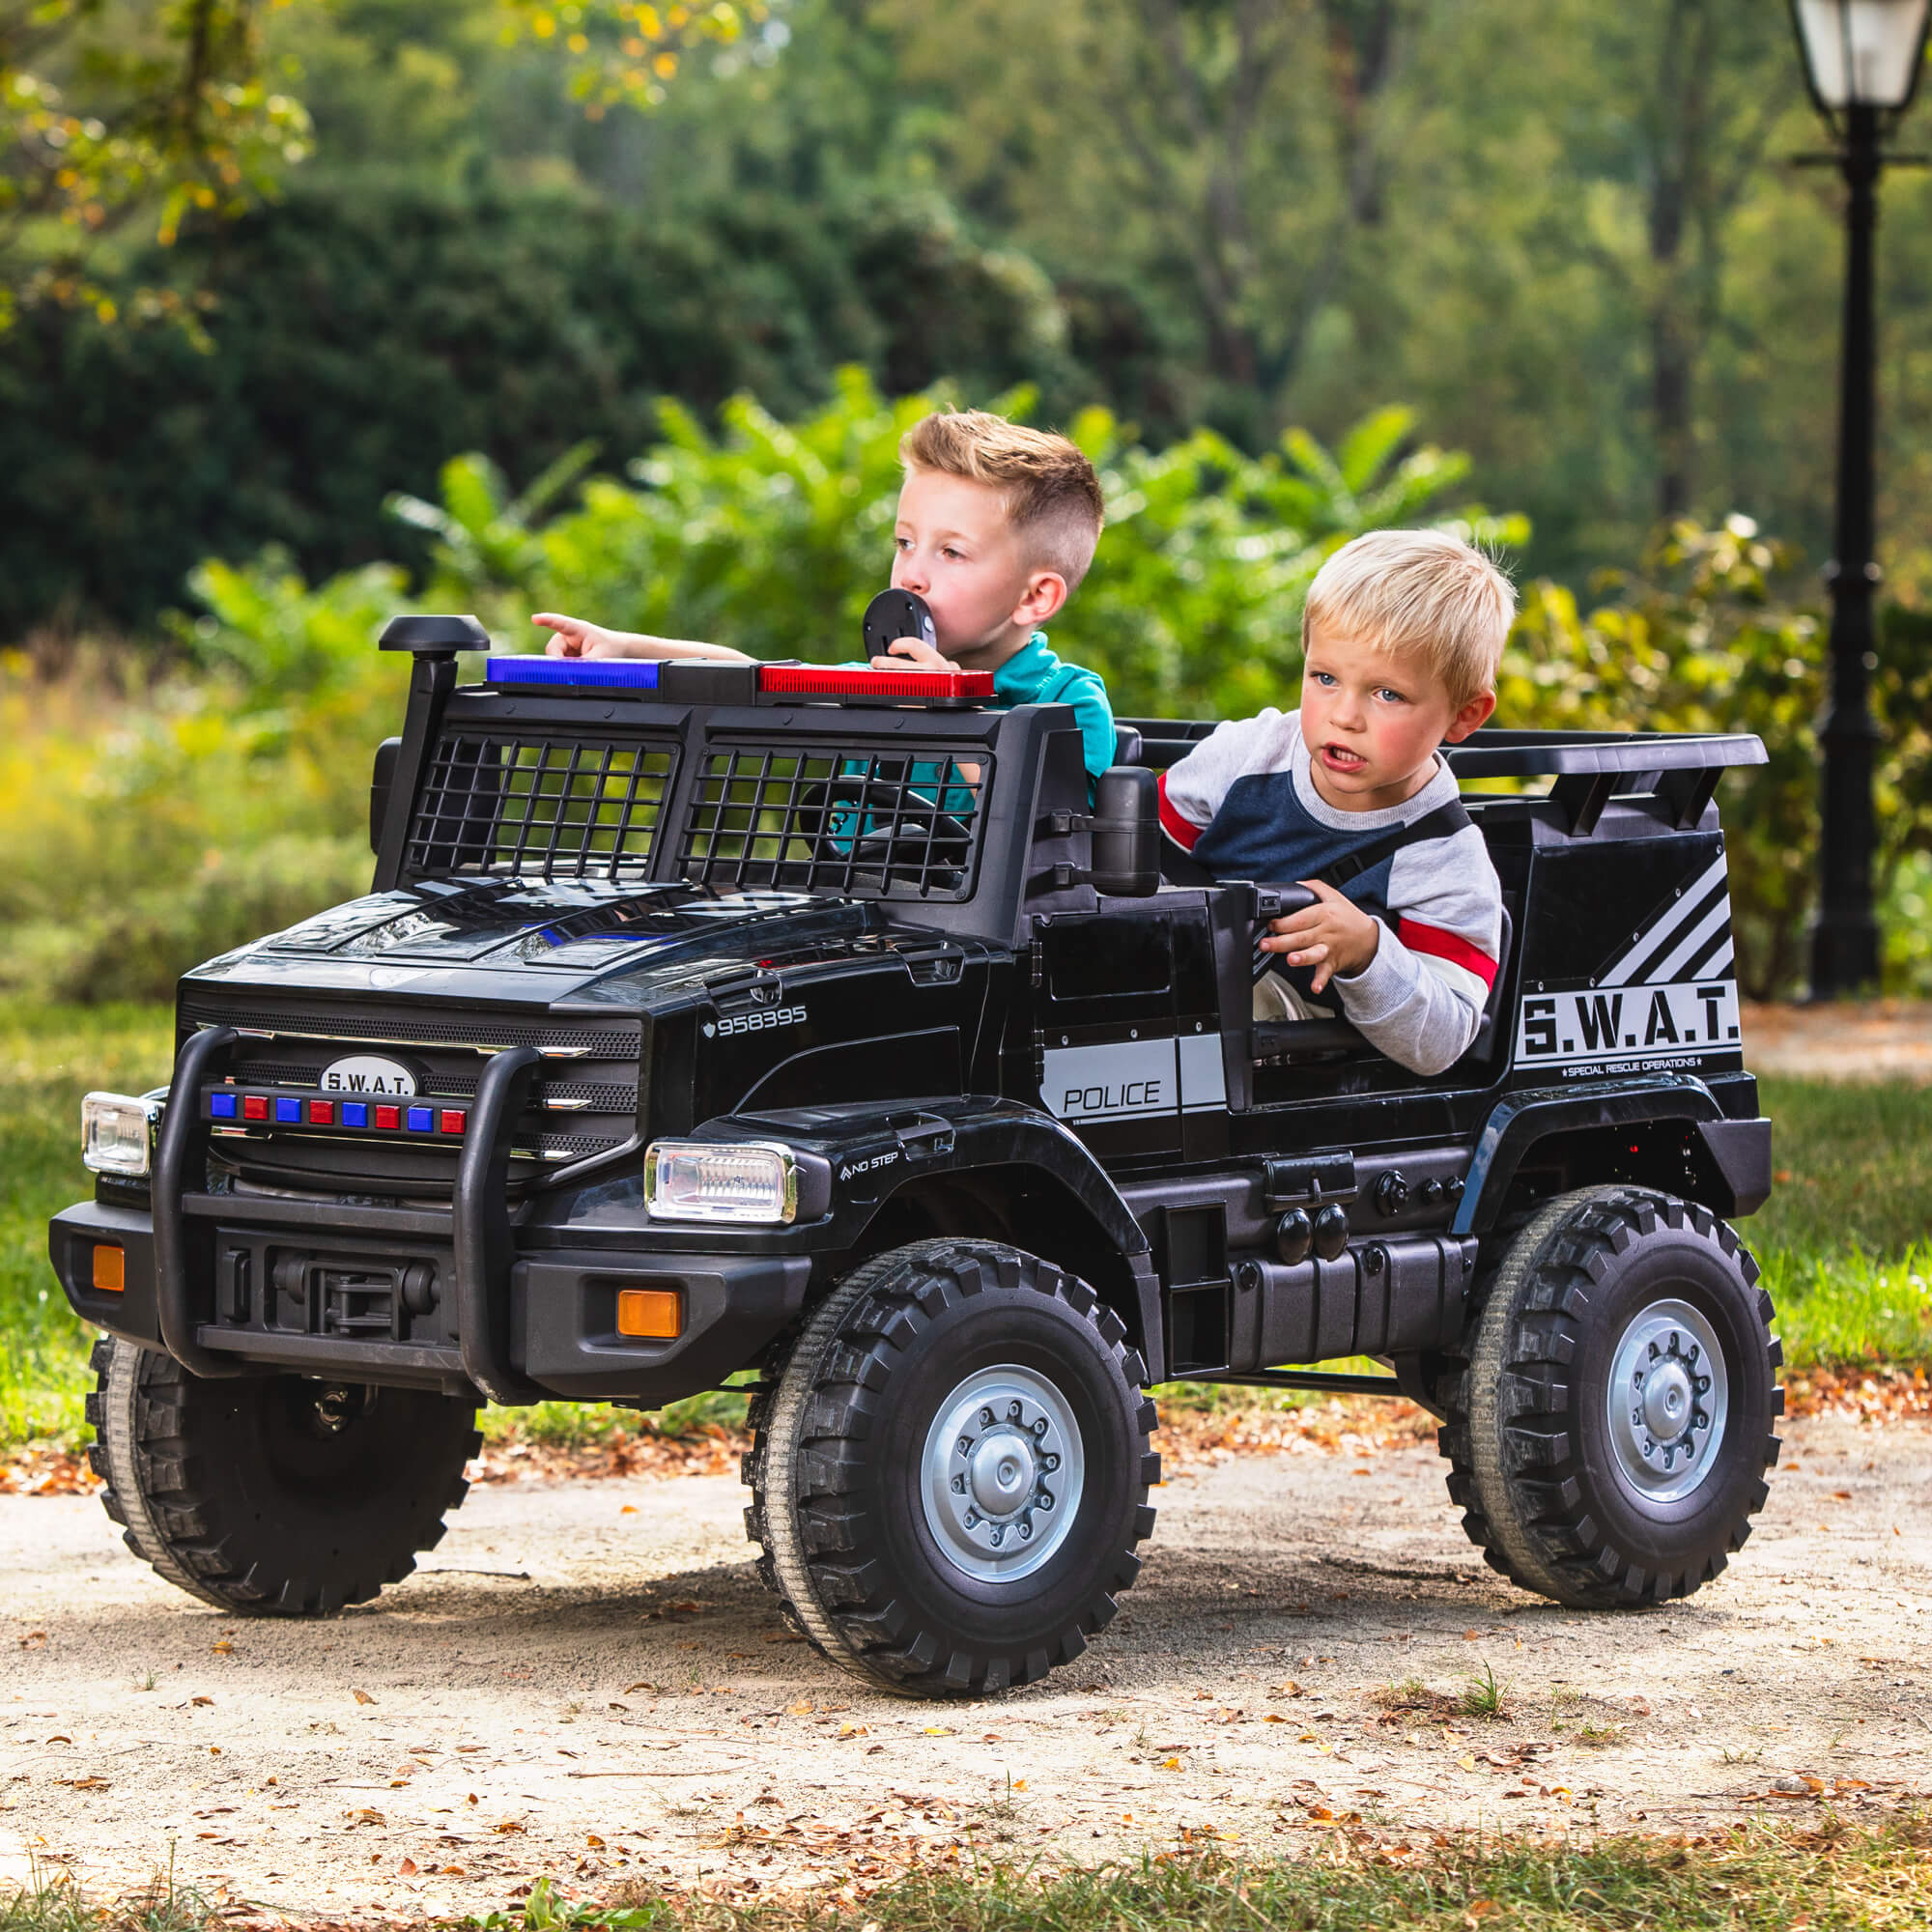 Huffy 12V Battery-Powered SWAT Truck 2-Seater Ride-On Toy - image 2 of 8